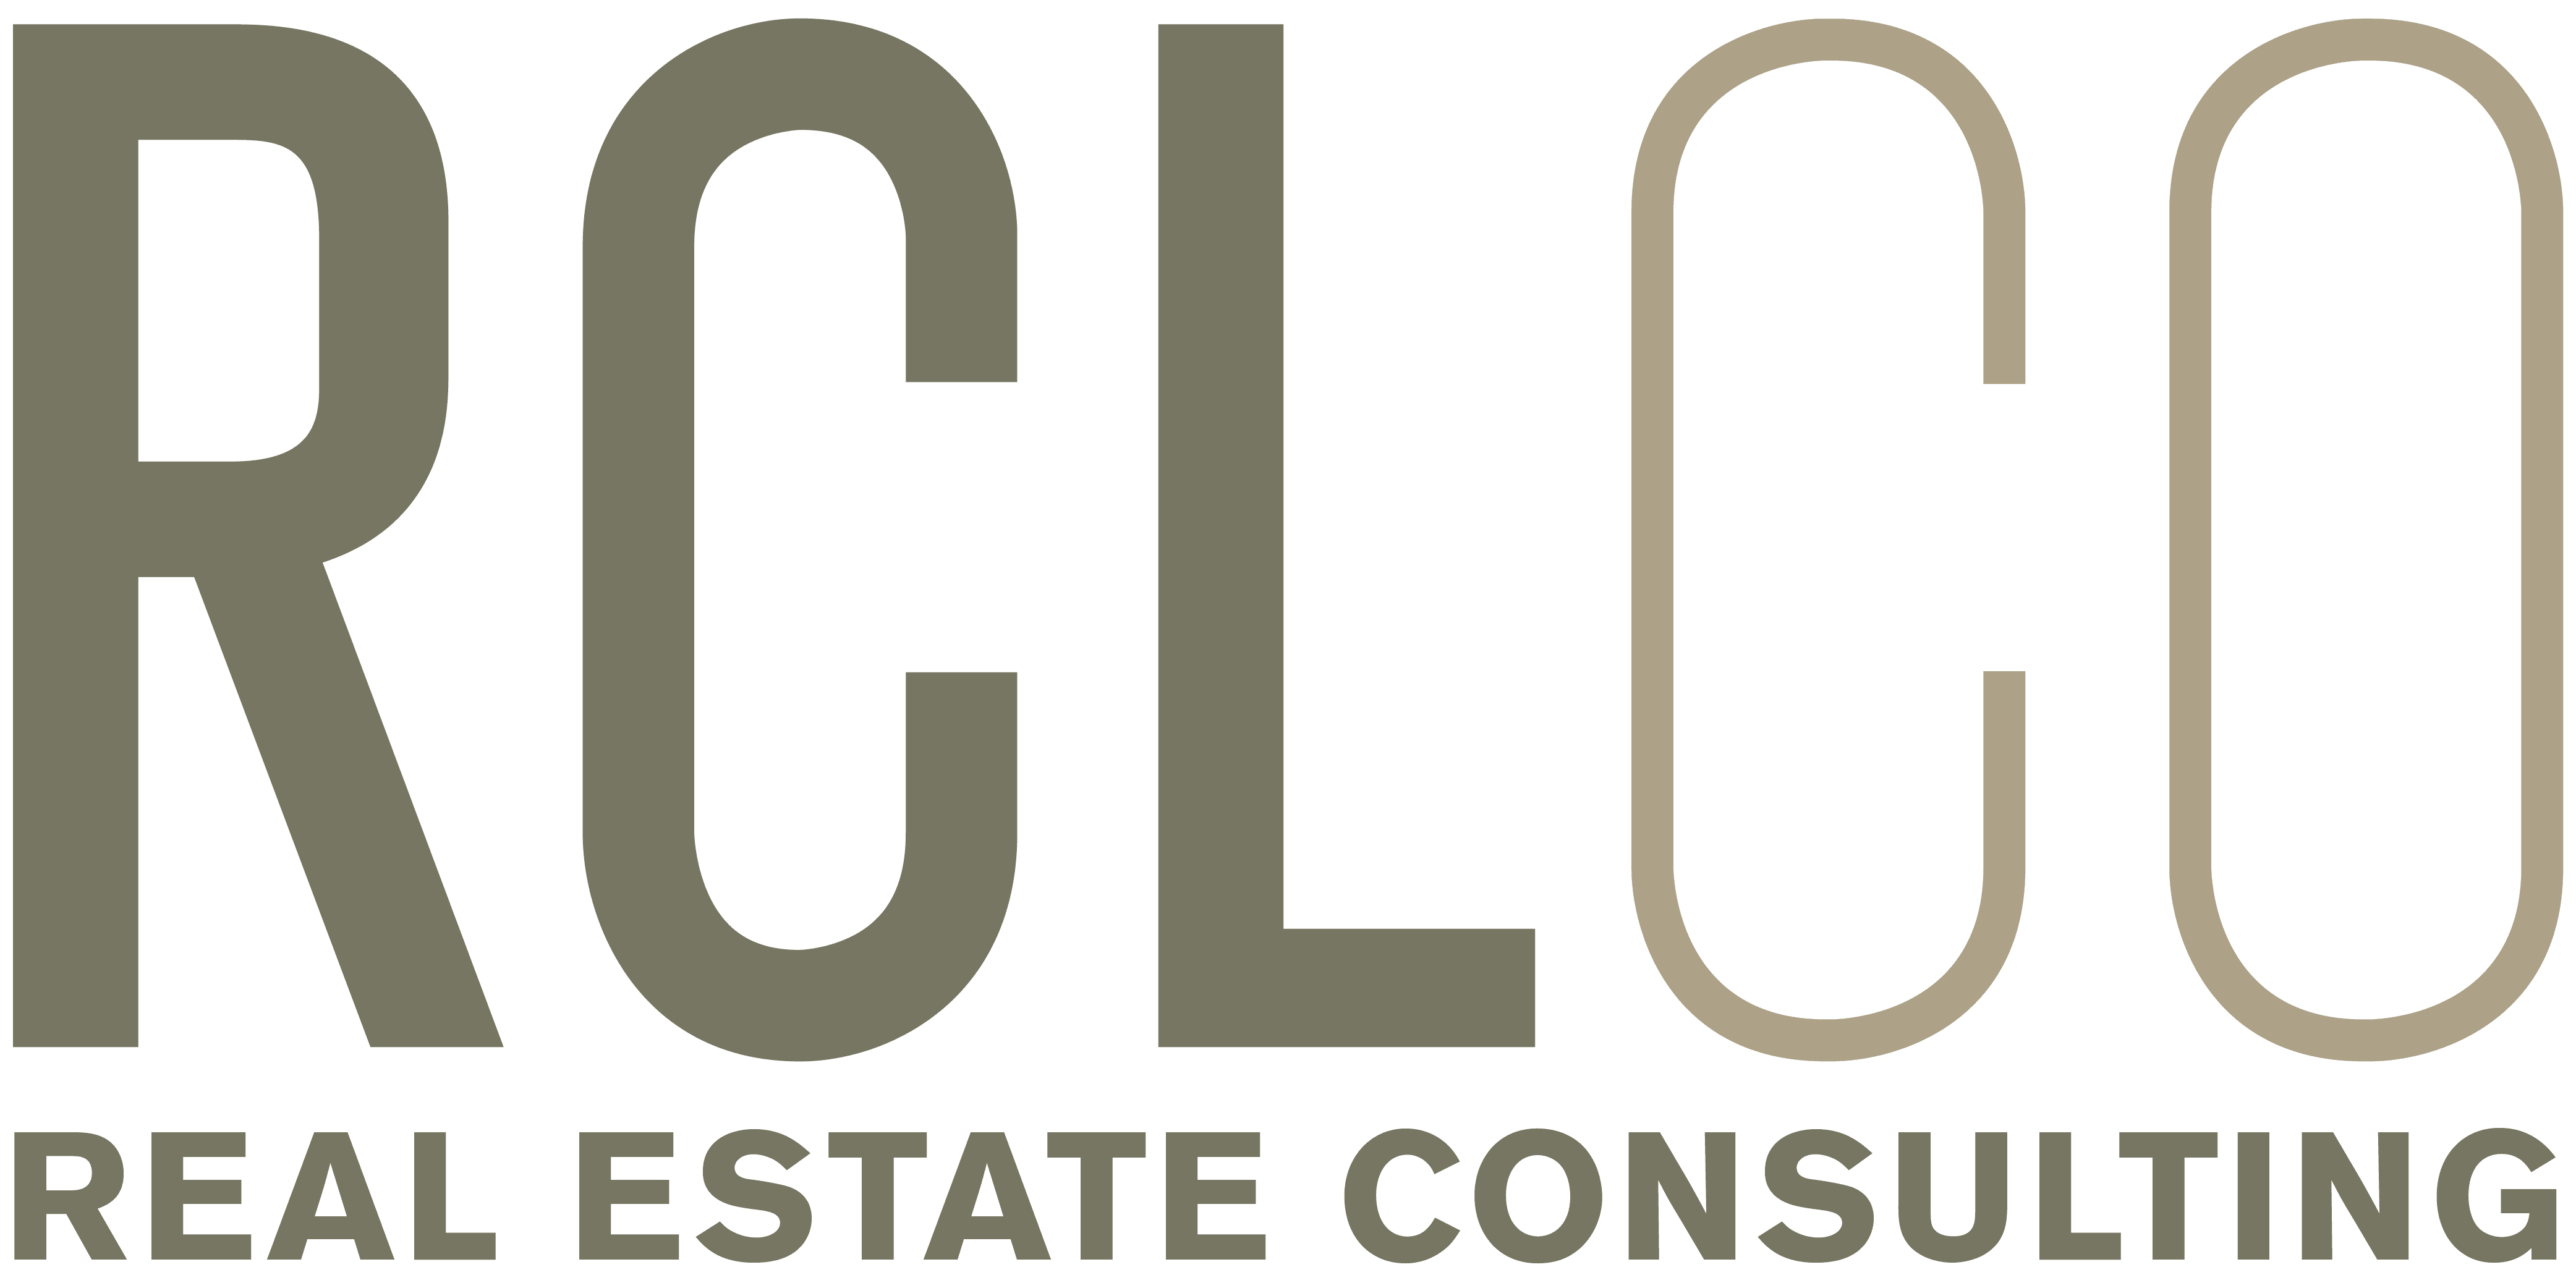 RCLCO Real Estate Consulting Logo